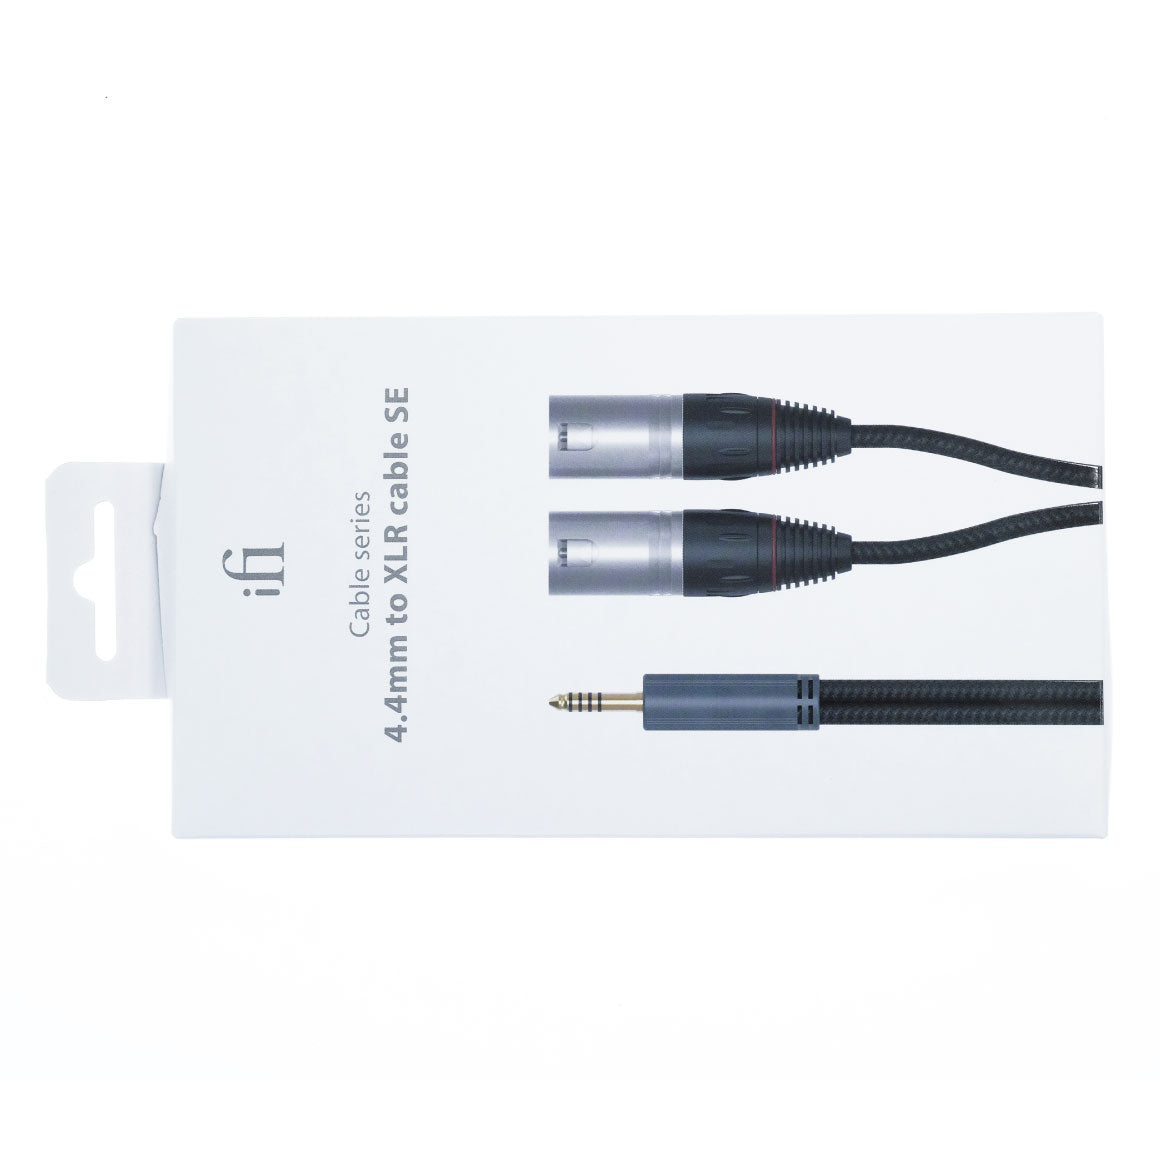 iFi Audio - Standard Edition 4.4mm to XLR Cable